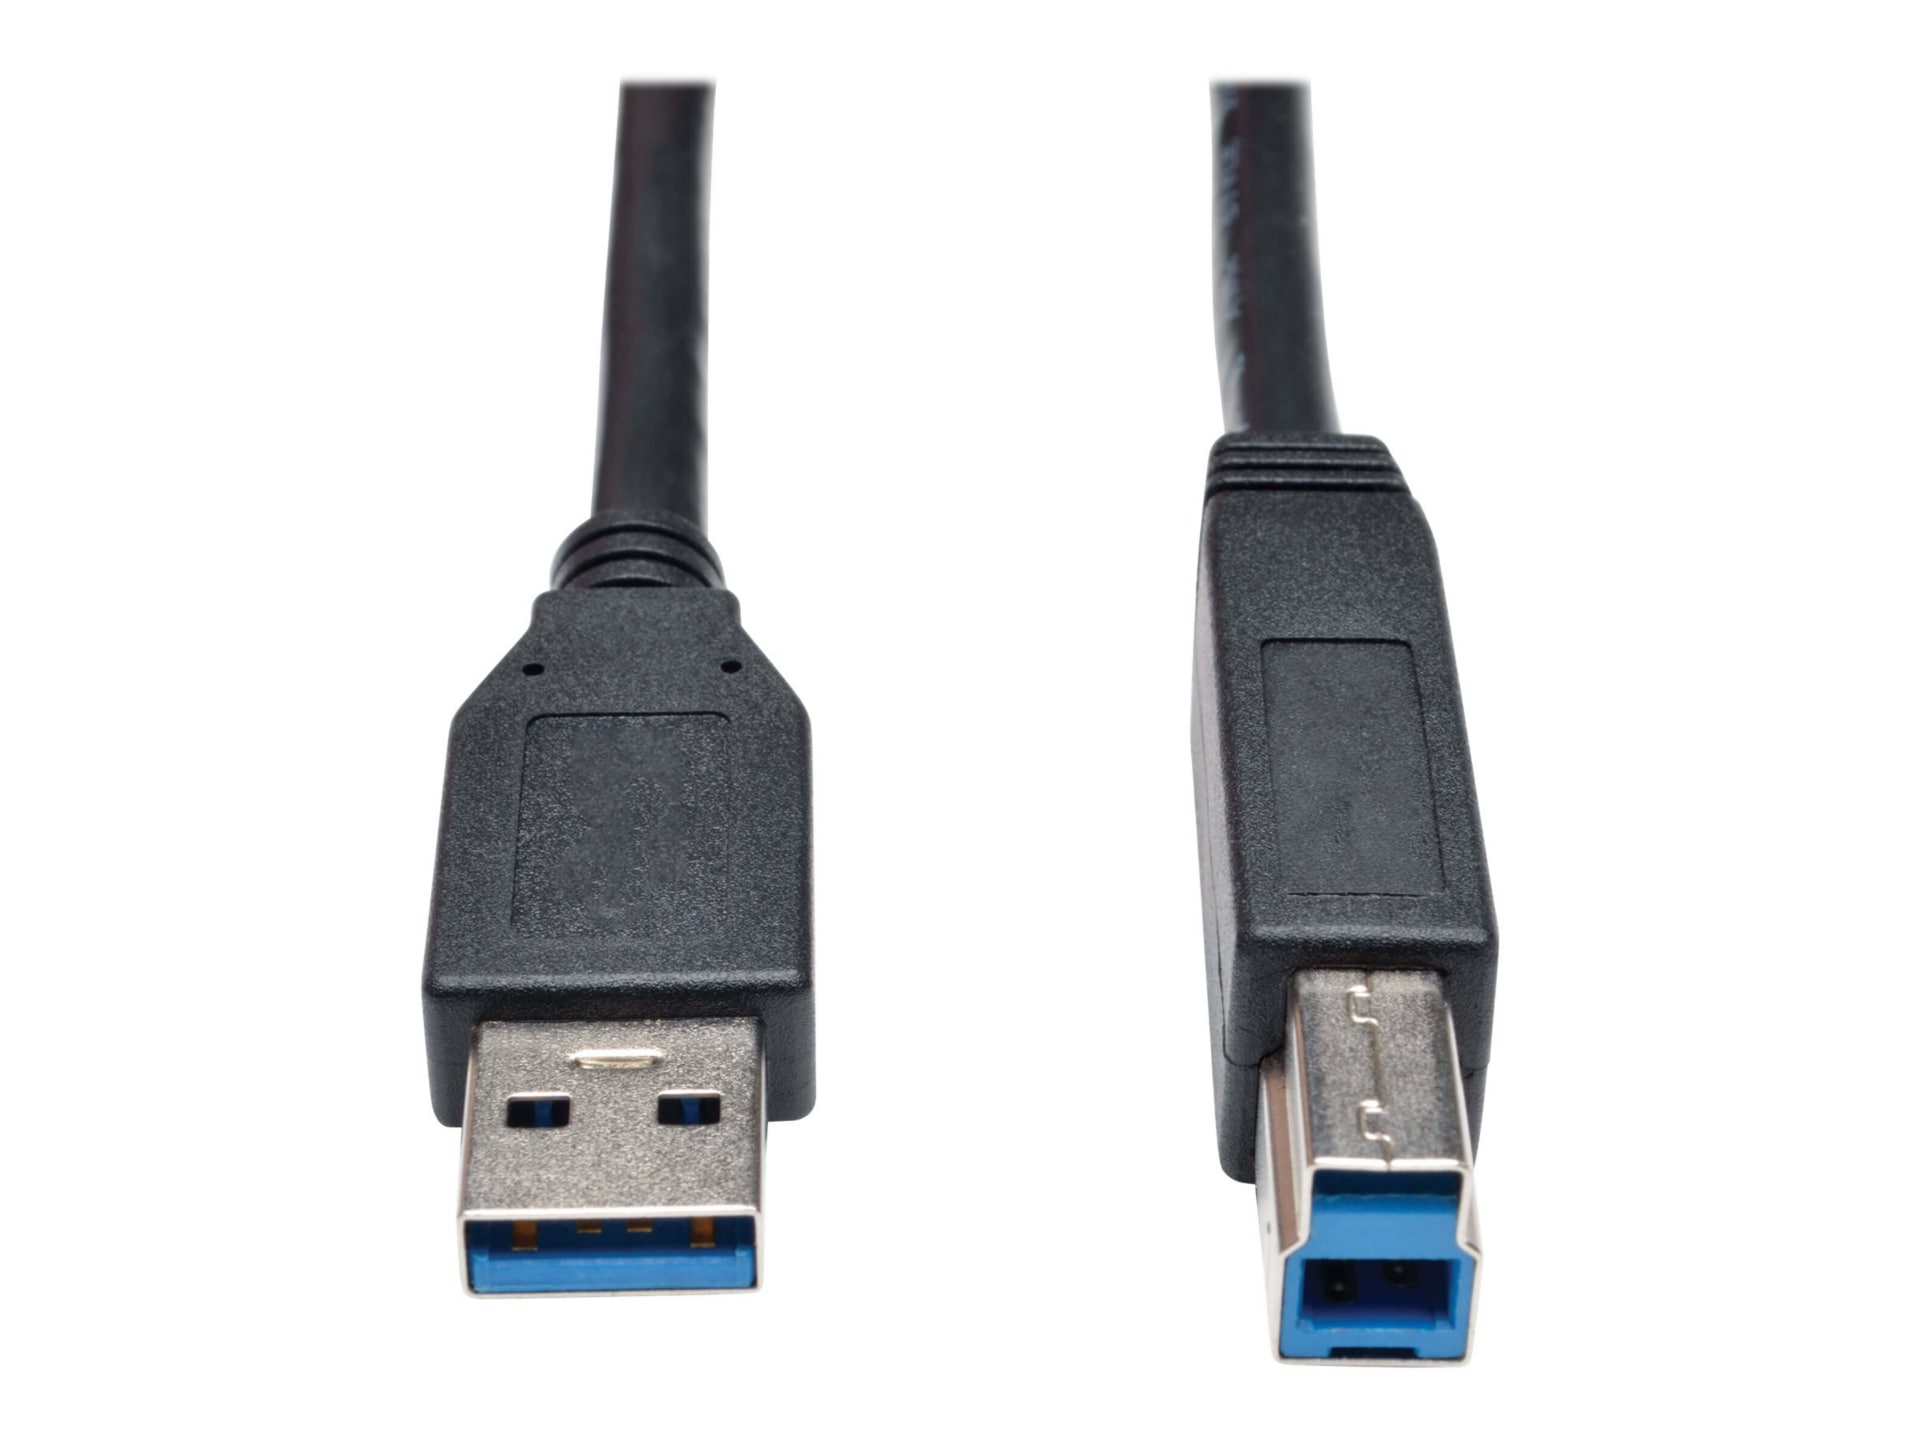 Eaton Tripp Lite Series USB 3.2 Gen 1 SuperSpeed Device Cable (A to B M/M) Black, 6 ft. (1.83 m) - USB cable - USB Type